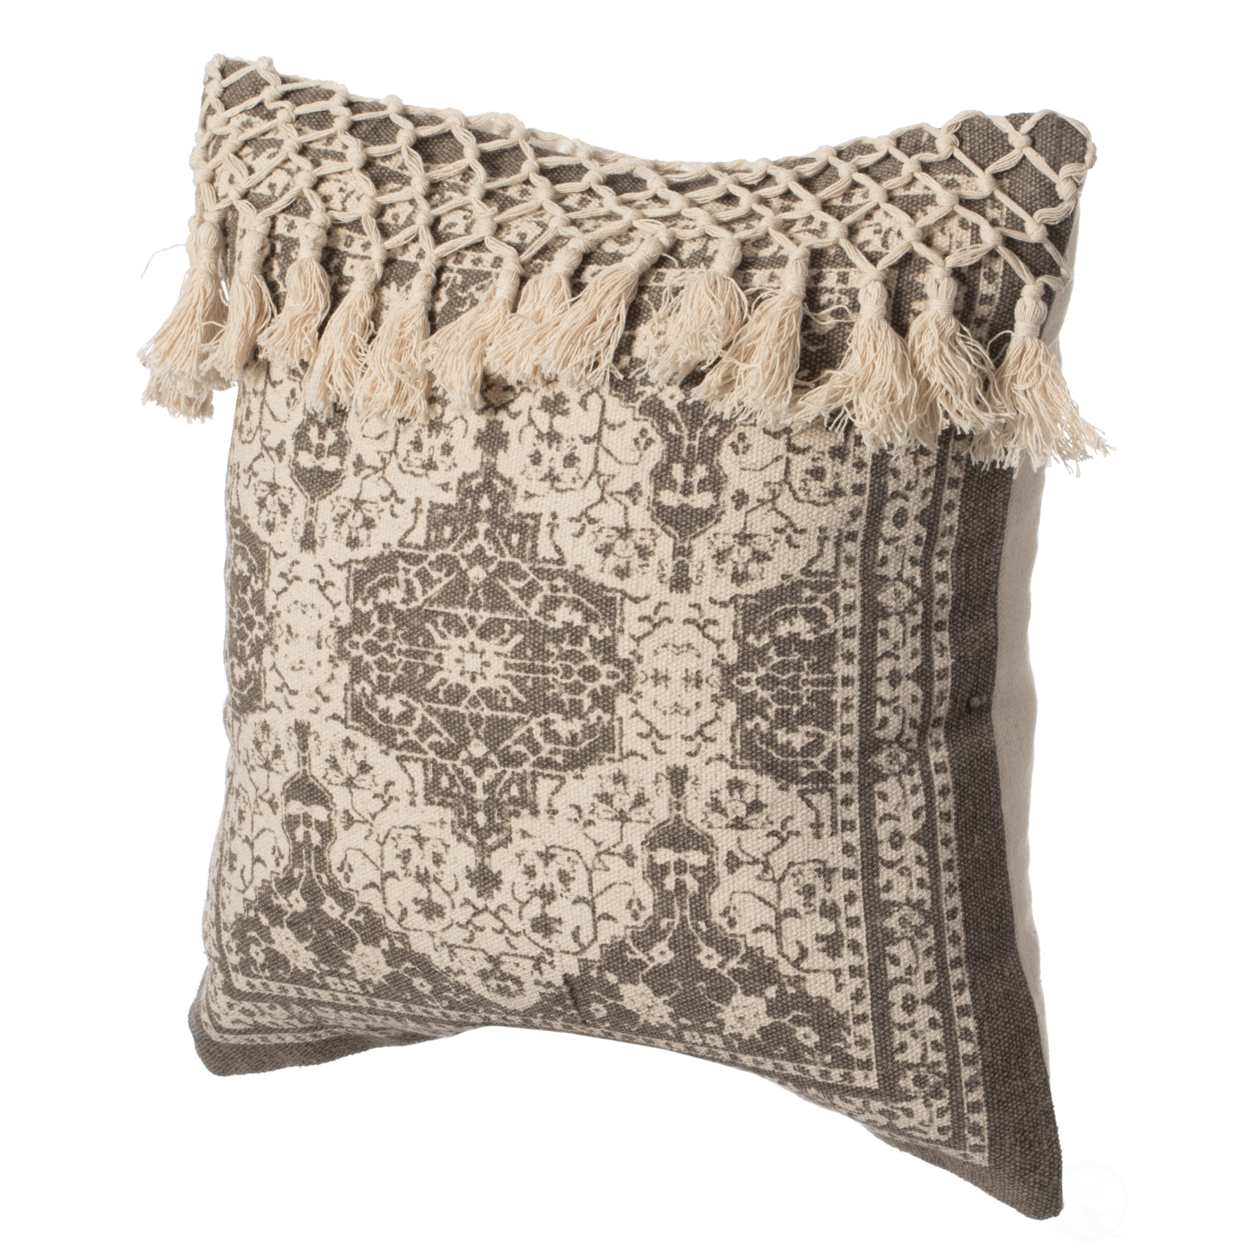 16 Handwoven Cotton Throw Pillow Cover With Traditional Pattern And Tasseled Top - Beige With Cushion